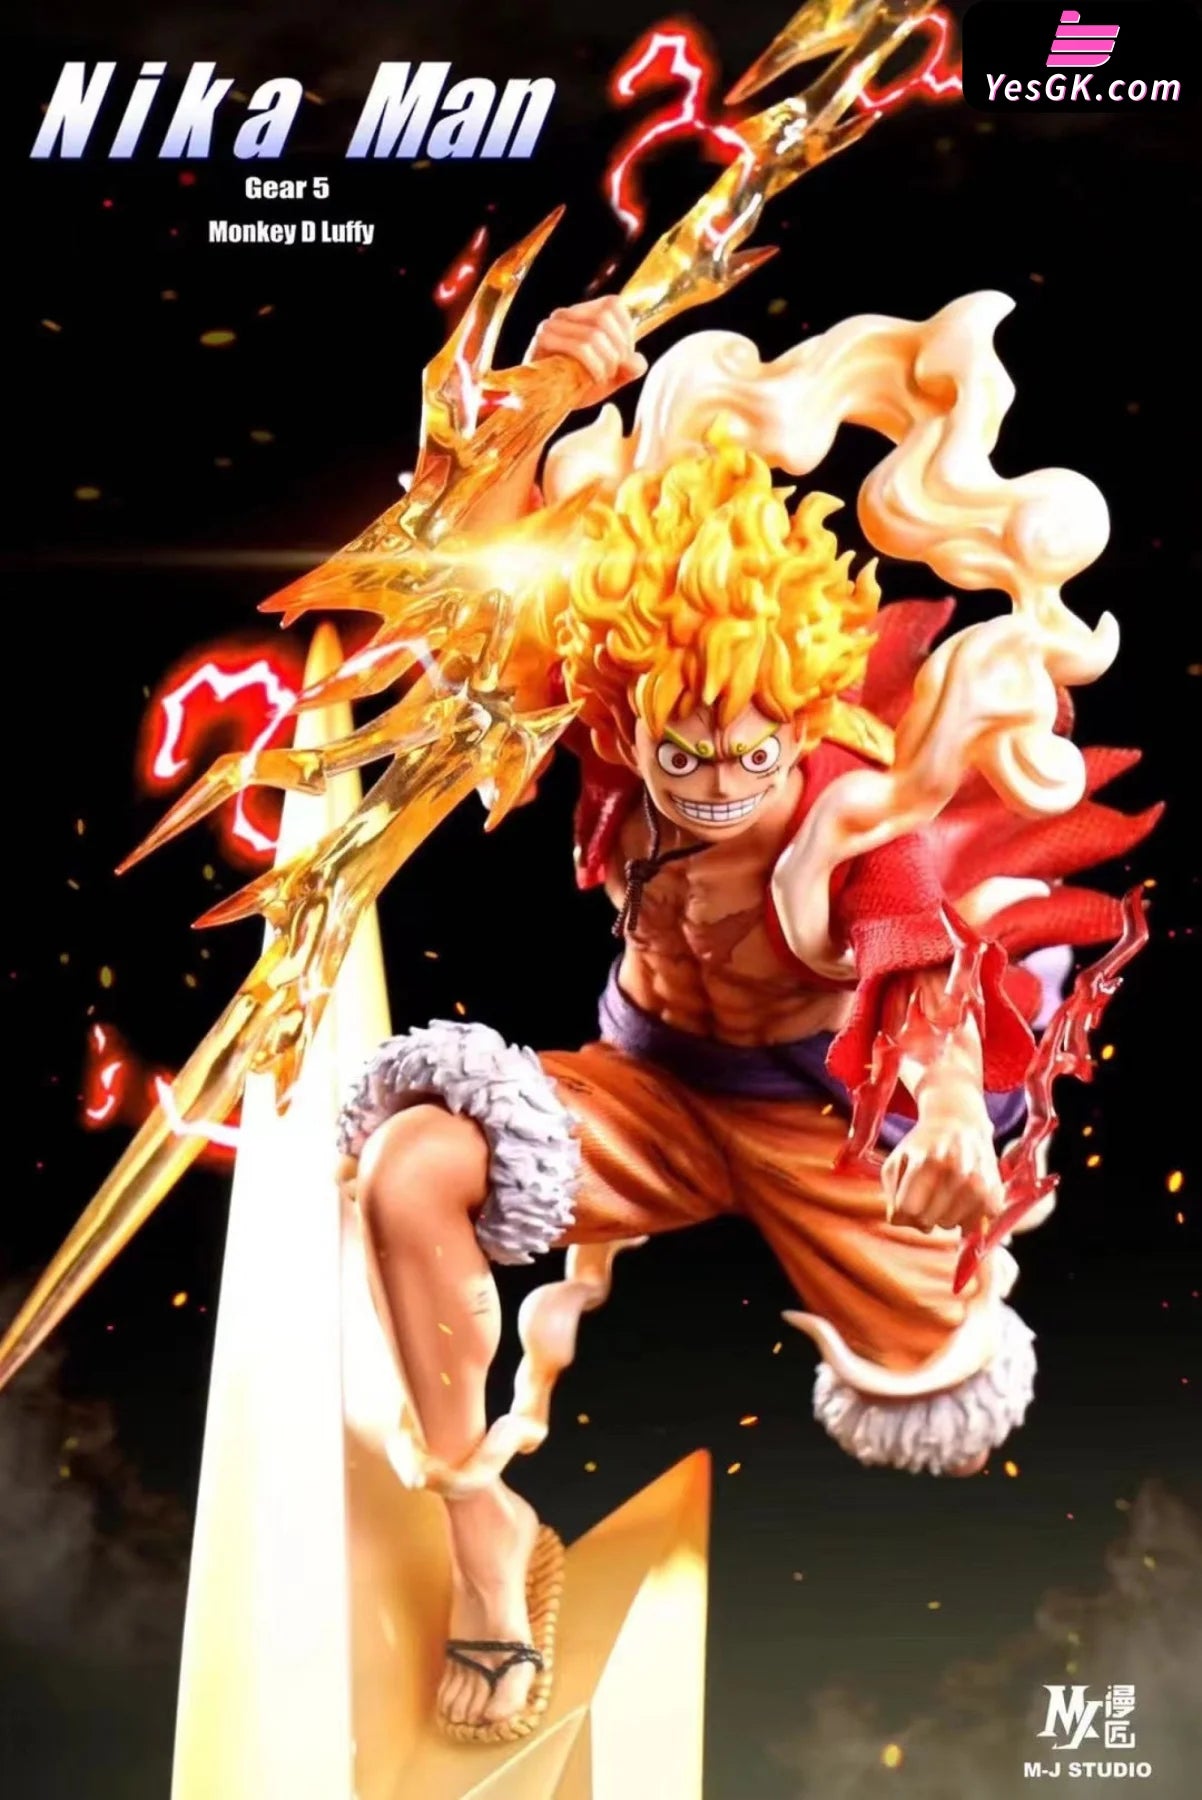 One Piece Figure - Luffy Gear 5 with Lightning